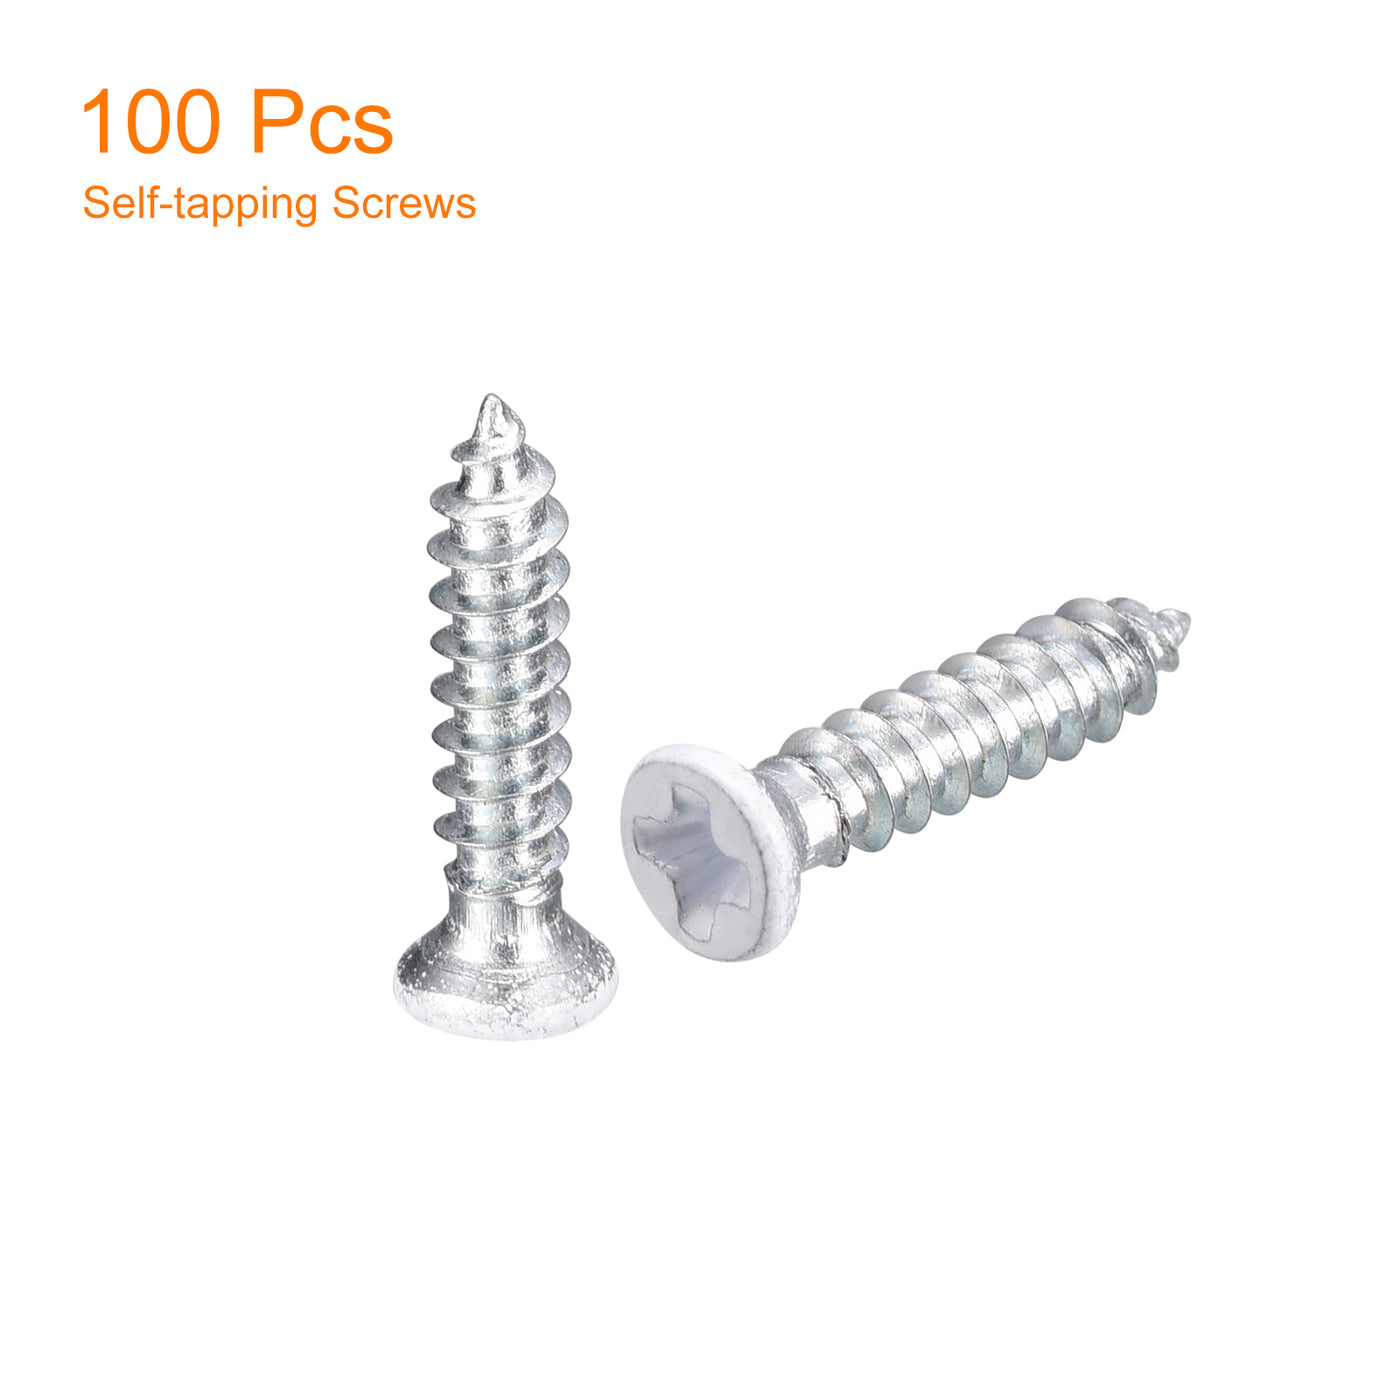 uxcell Uxcell ST2.5x12mm White Self Tapping Screws, 100pcs Flat Head Phillips Wood Screws